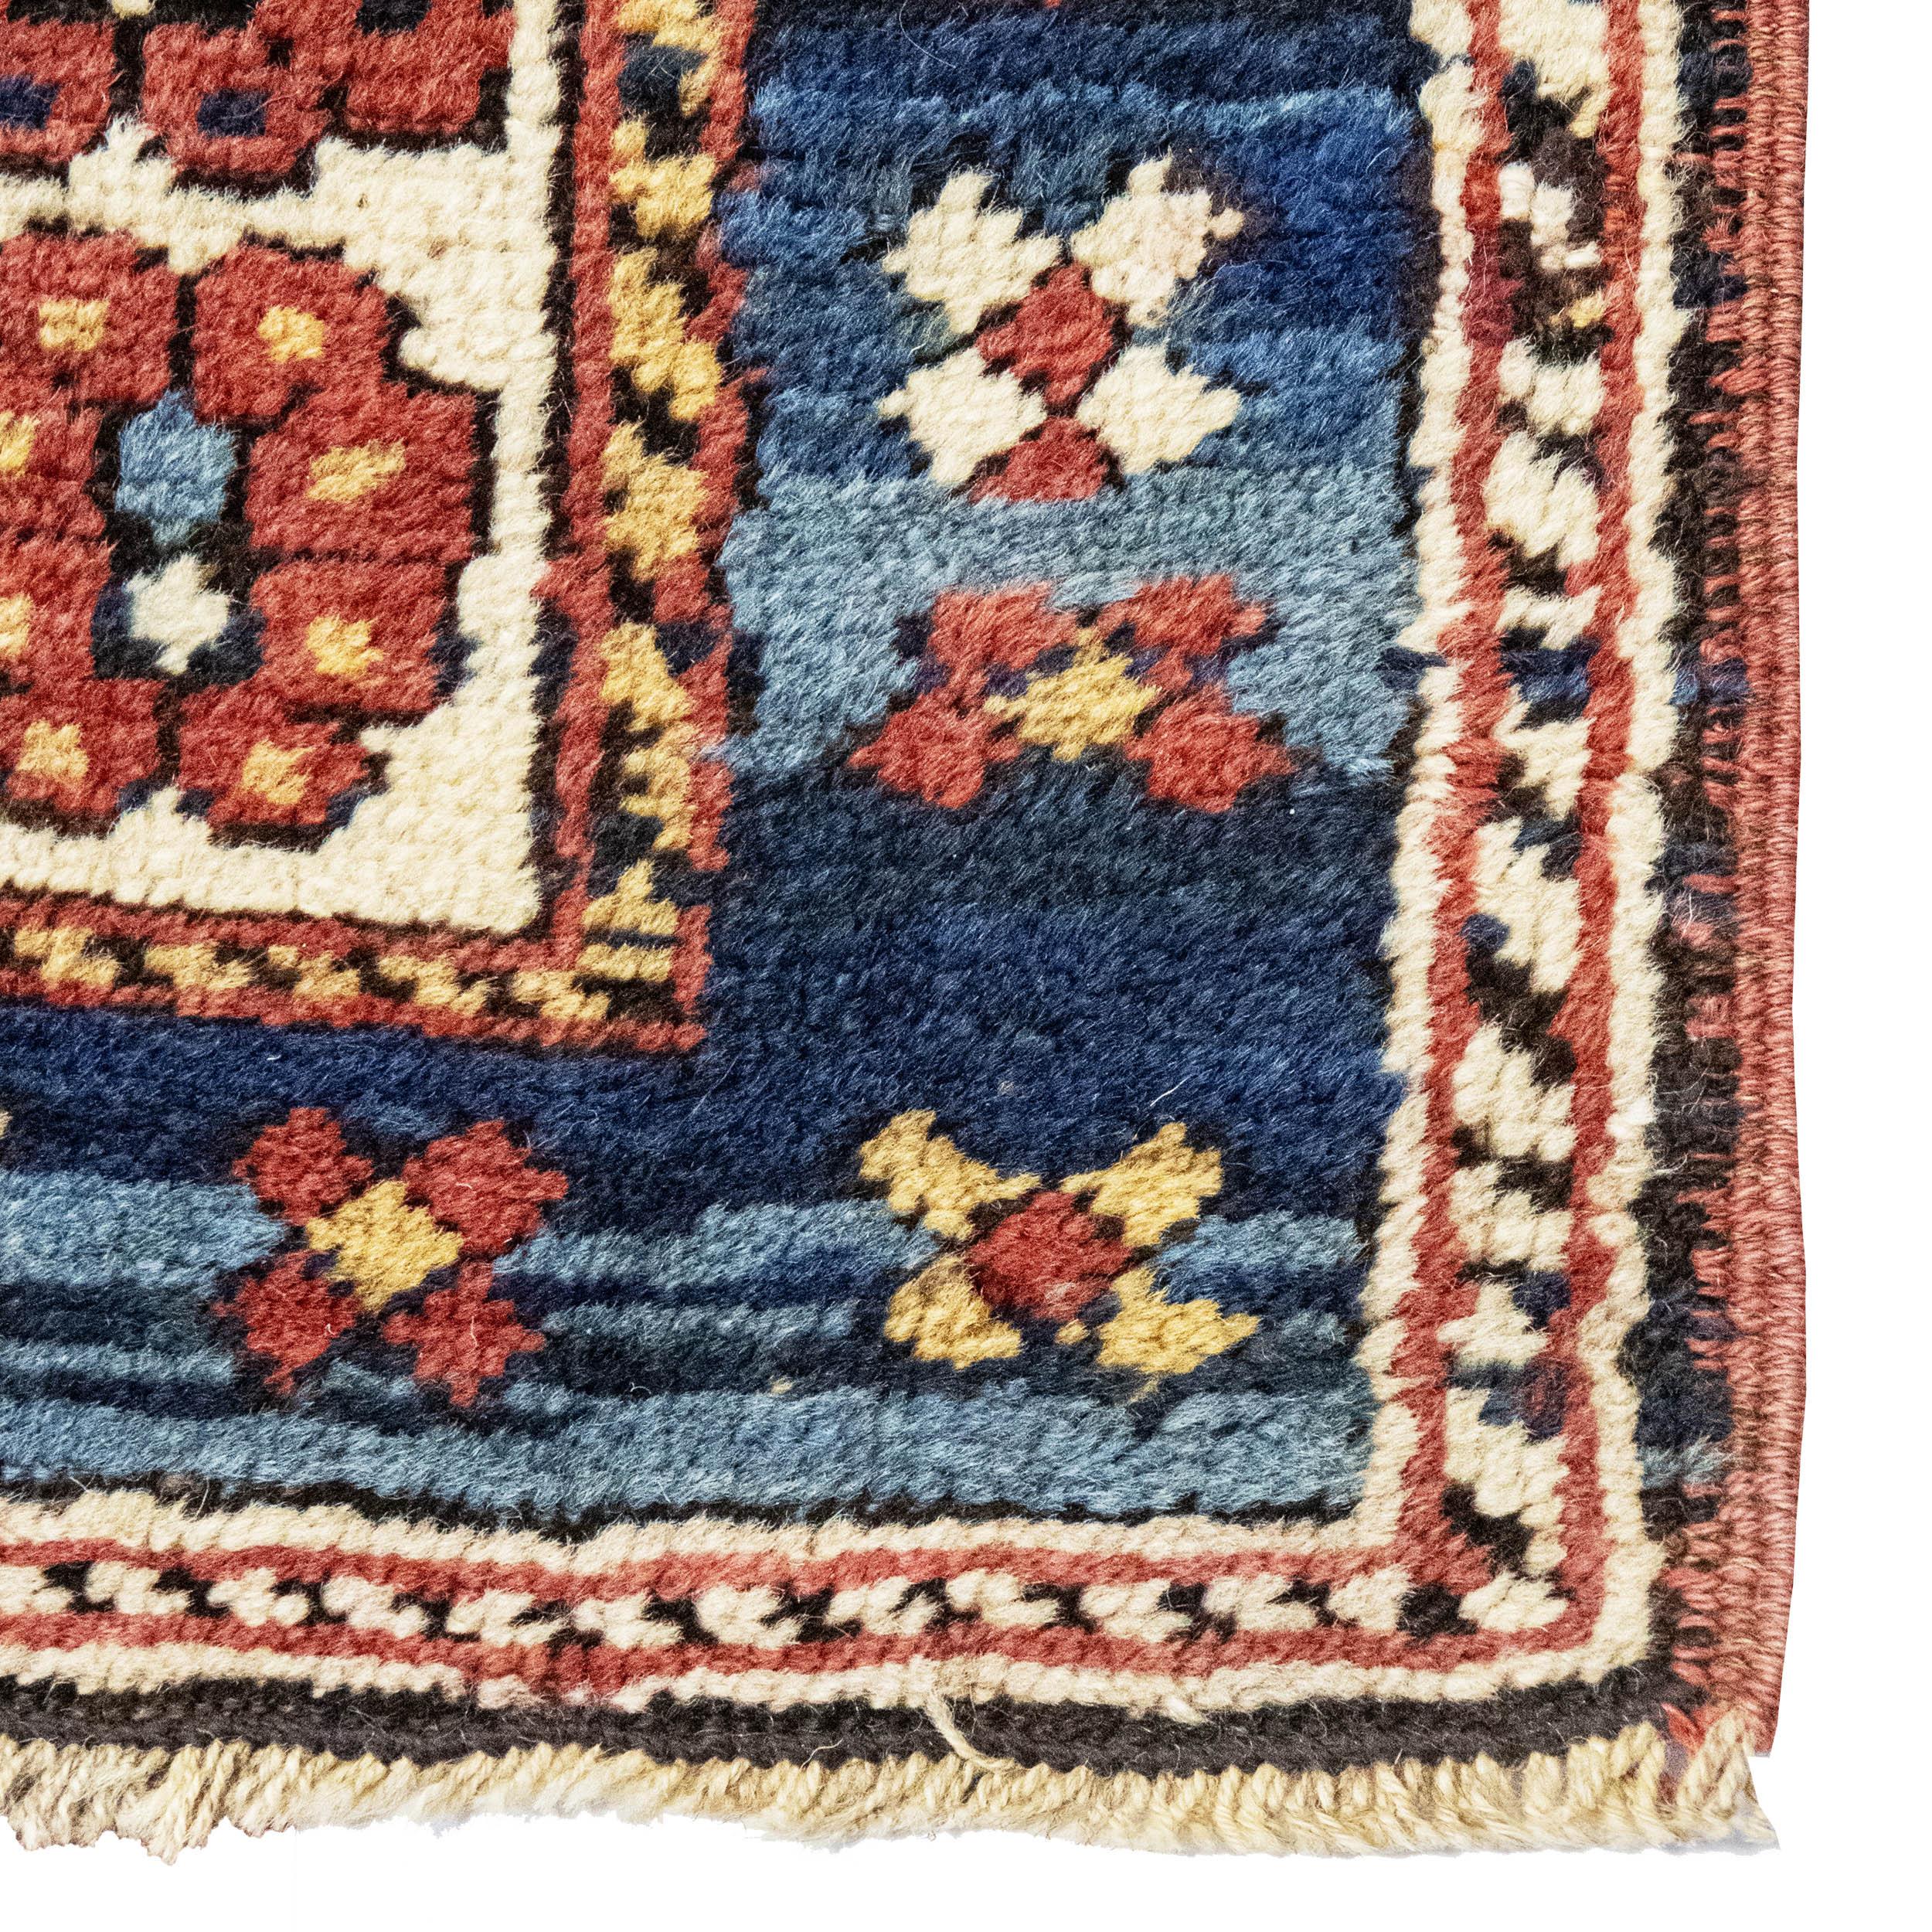 An Antique Persian fine Kazak runner is a slender and captivating textile originating from the Kazak region in the Caucasus. Handwoven with premium wool and natural dyes, its bold geometric designs and tribal motifs, like 